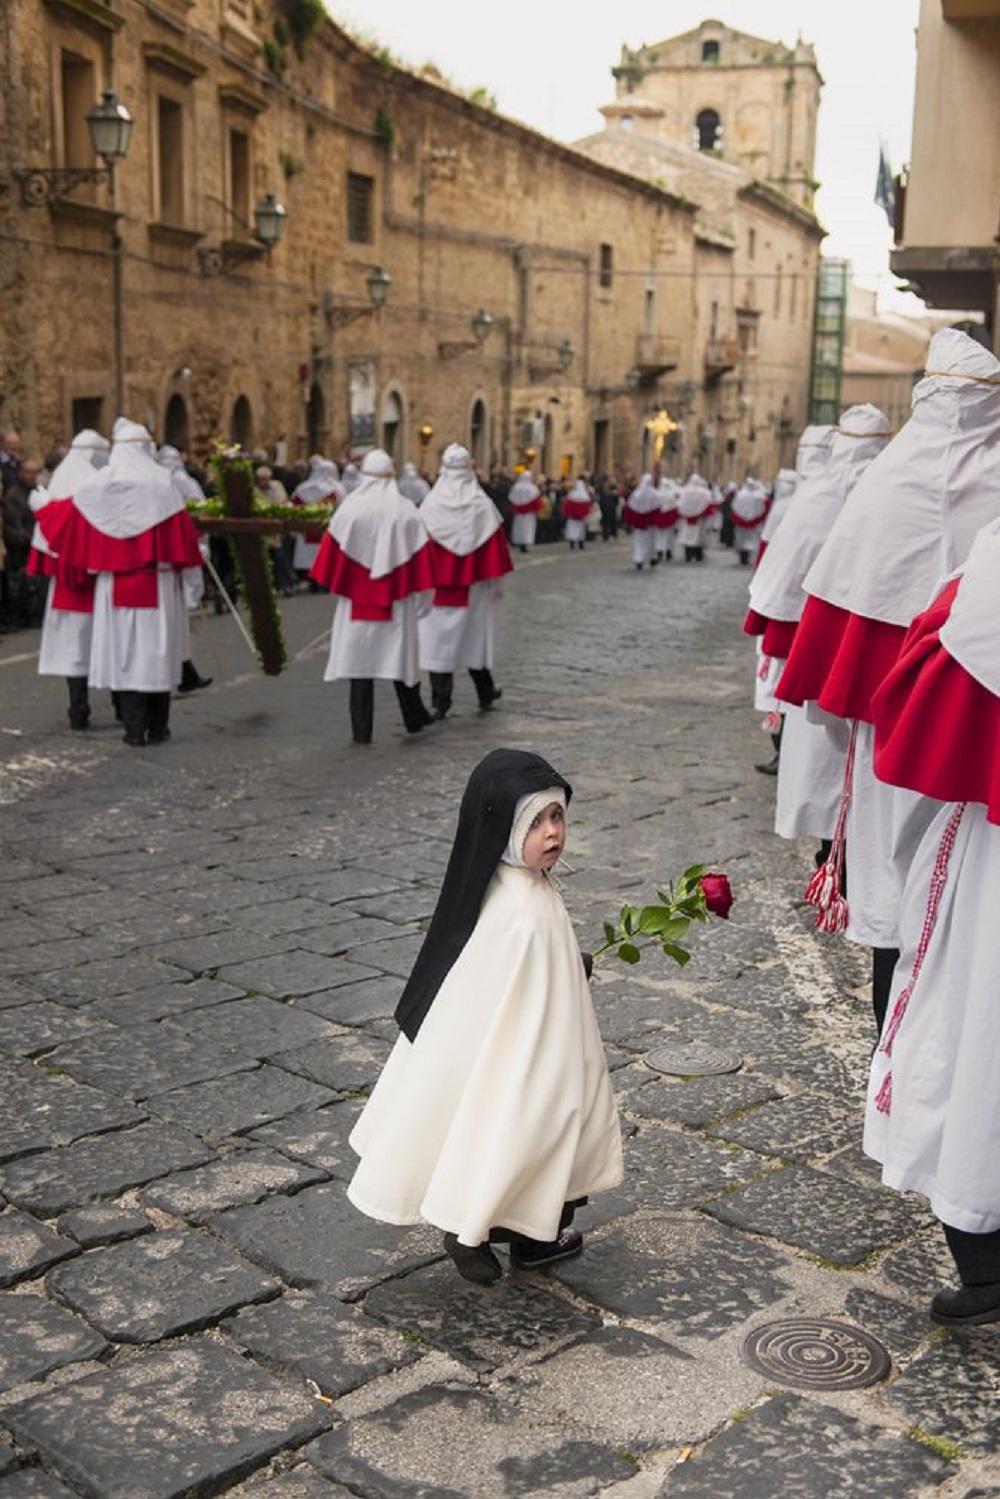 Easter Penitents Procession, Sicily, Italy